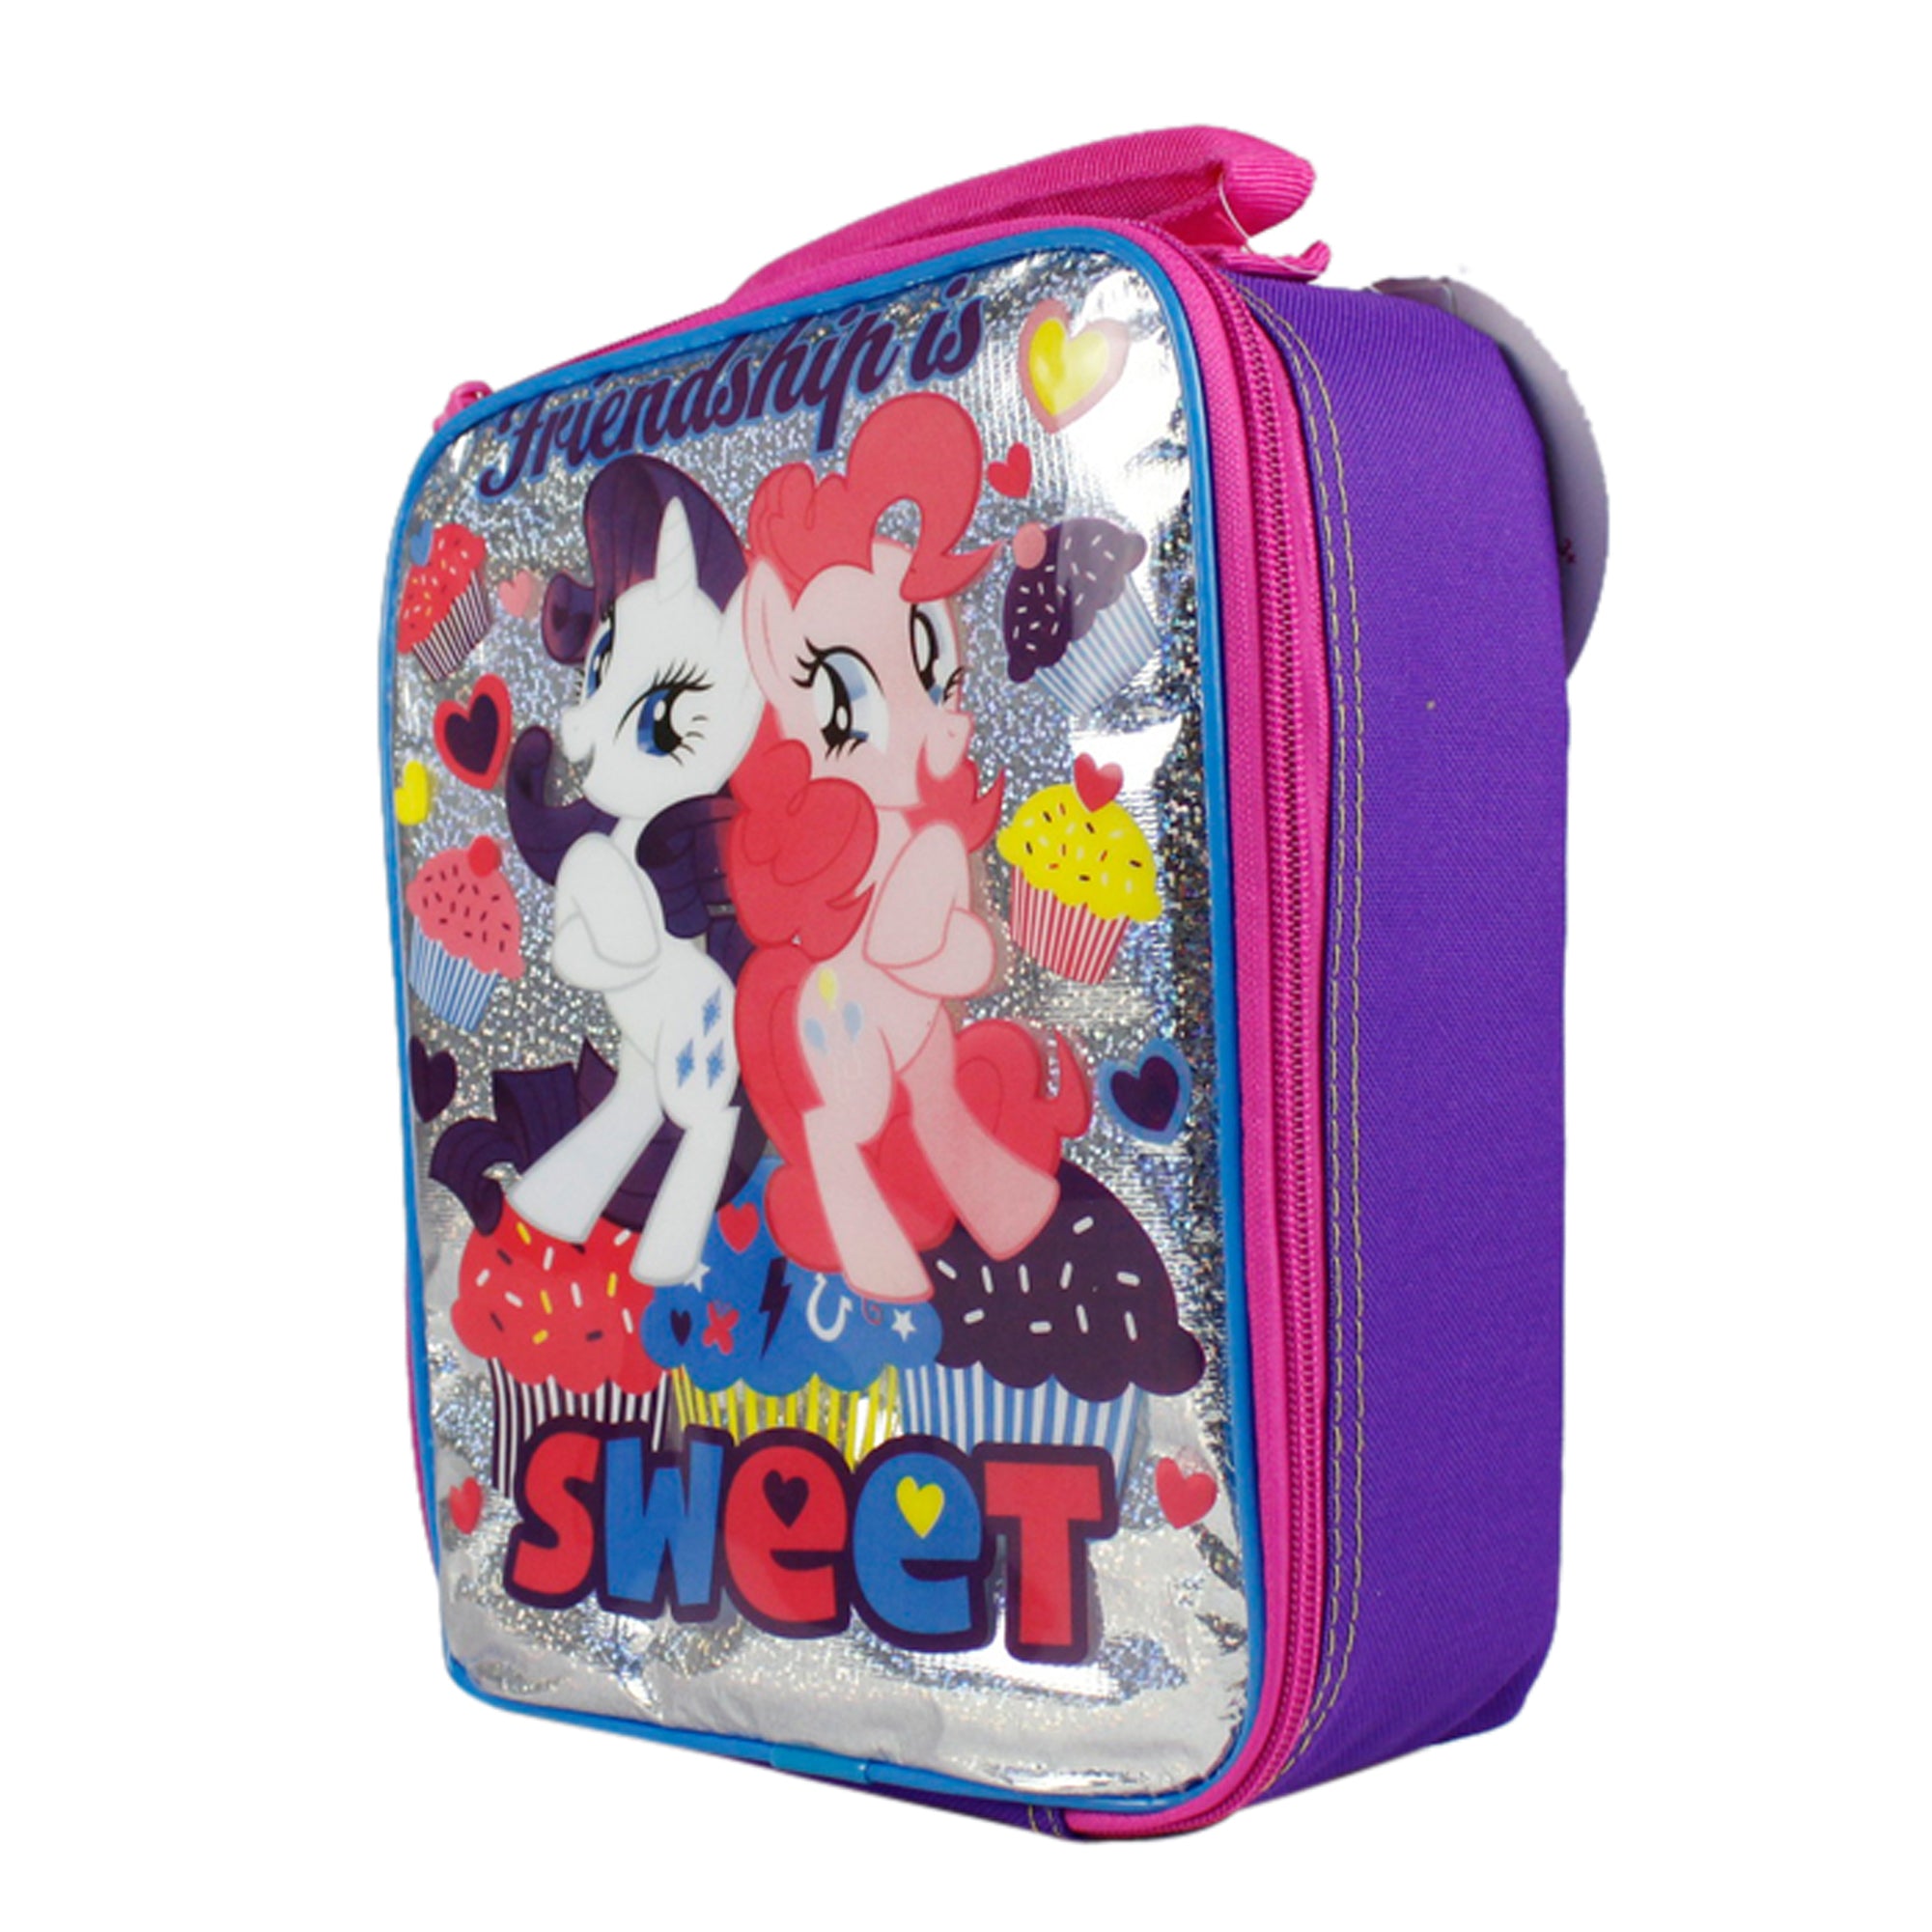 Brand New My Little Pony Lunch Bag Ideal for School or Nursery - Bargain  WholeSalers